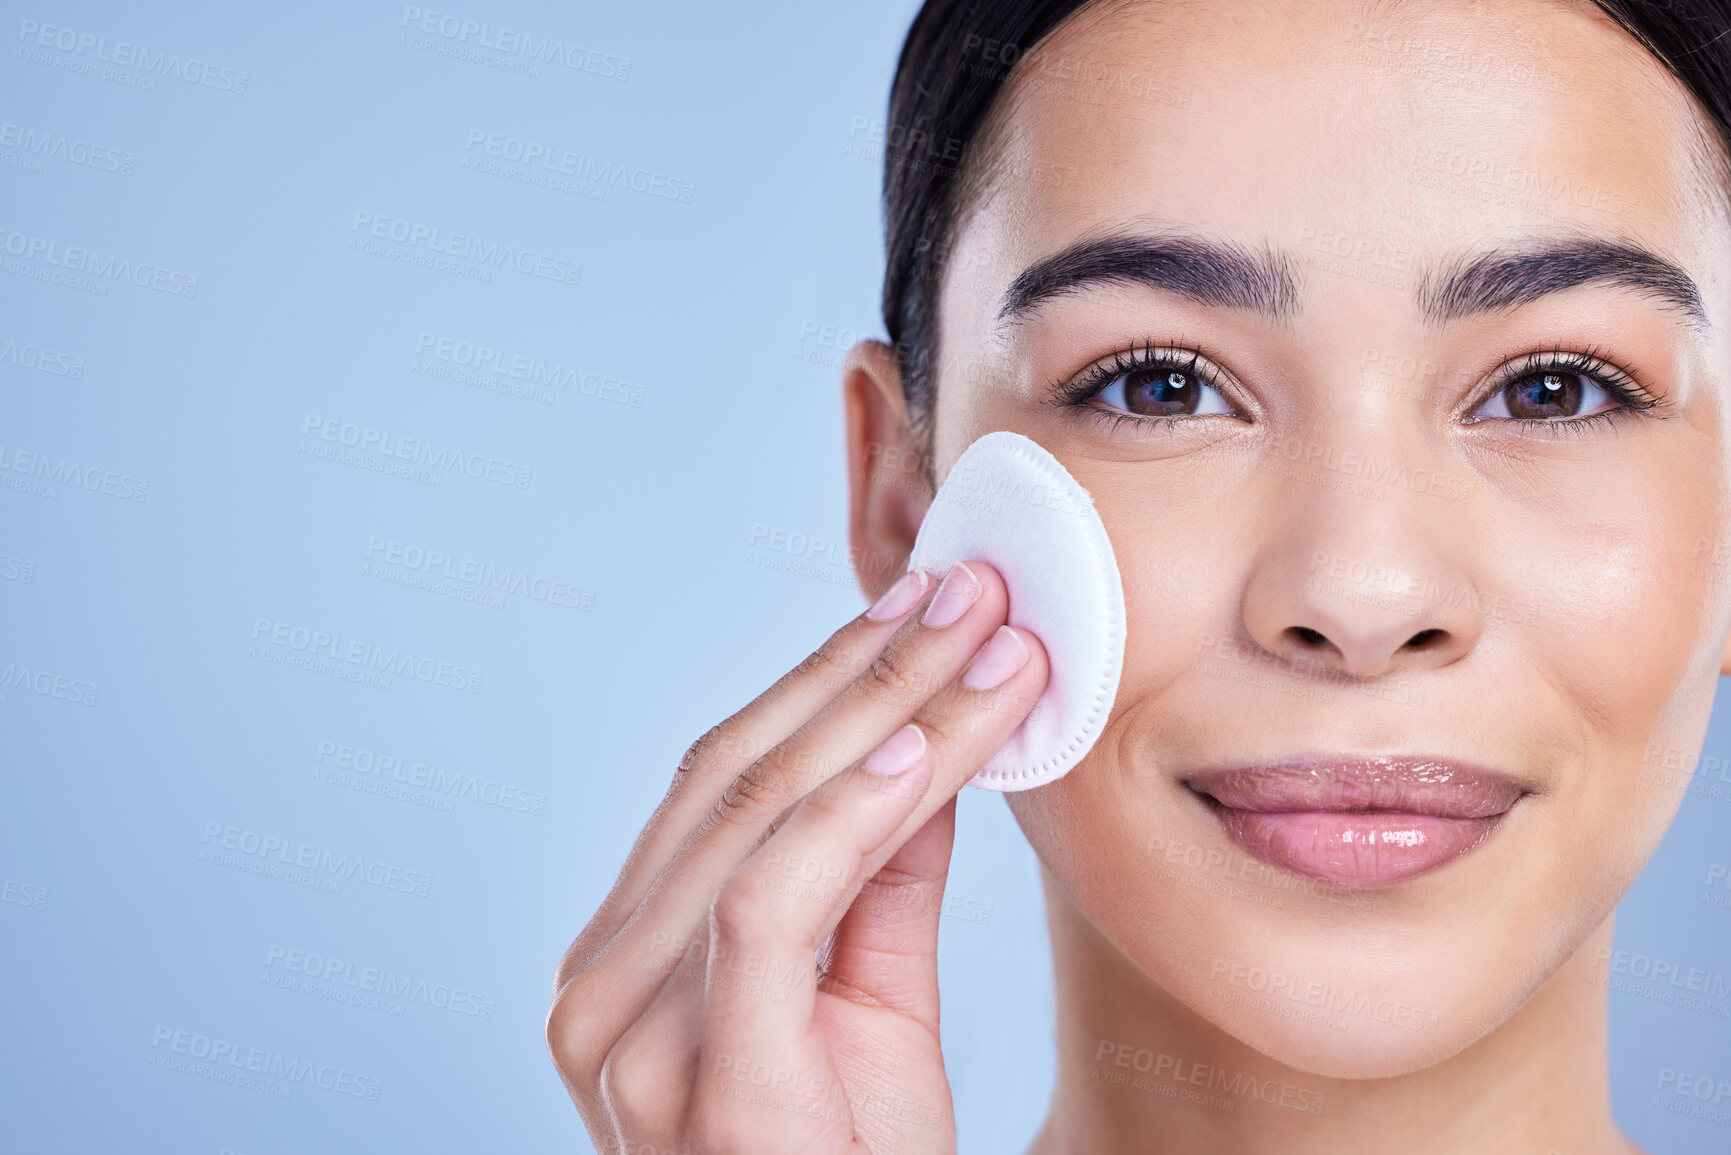 Buy stock photo Studio Portrait of a beautiful mixed race woman using a cotton pad to remove makeup during a selfcare grooming routine. Hispanic woman applying cleanser to her face against blue copyspace background